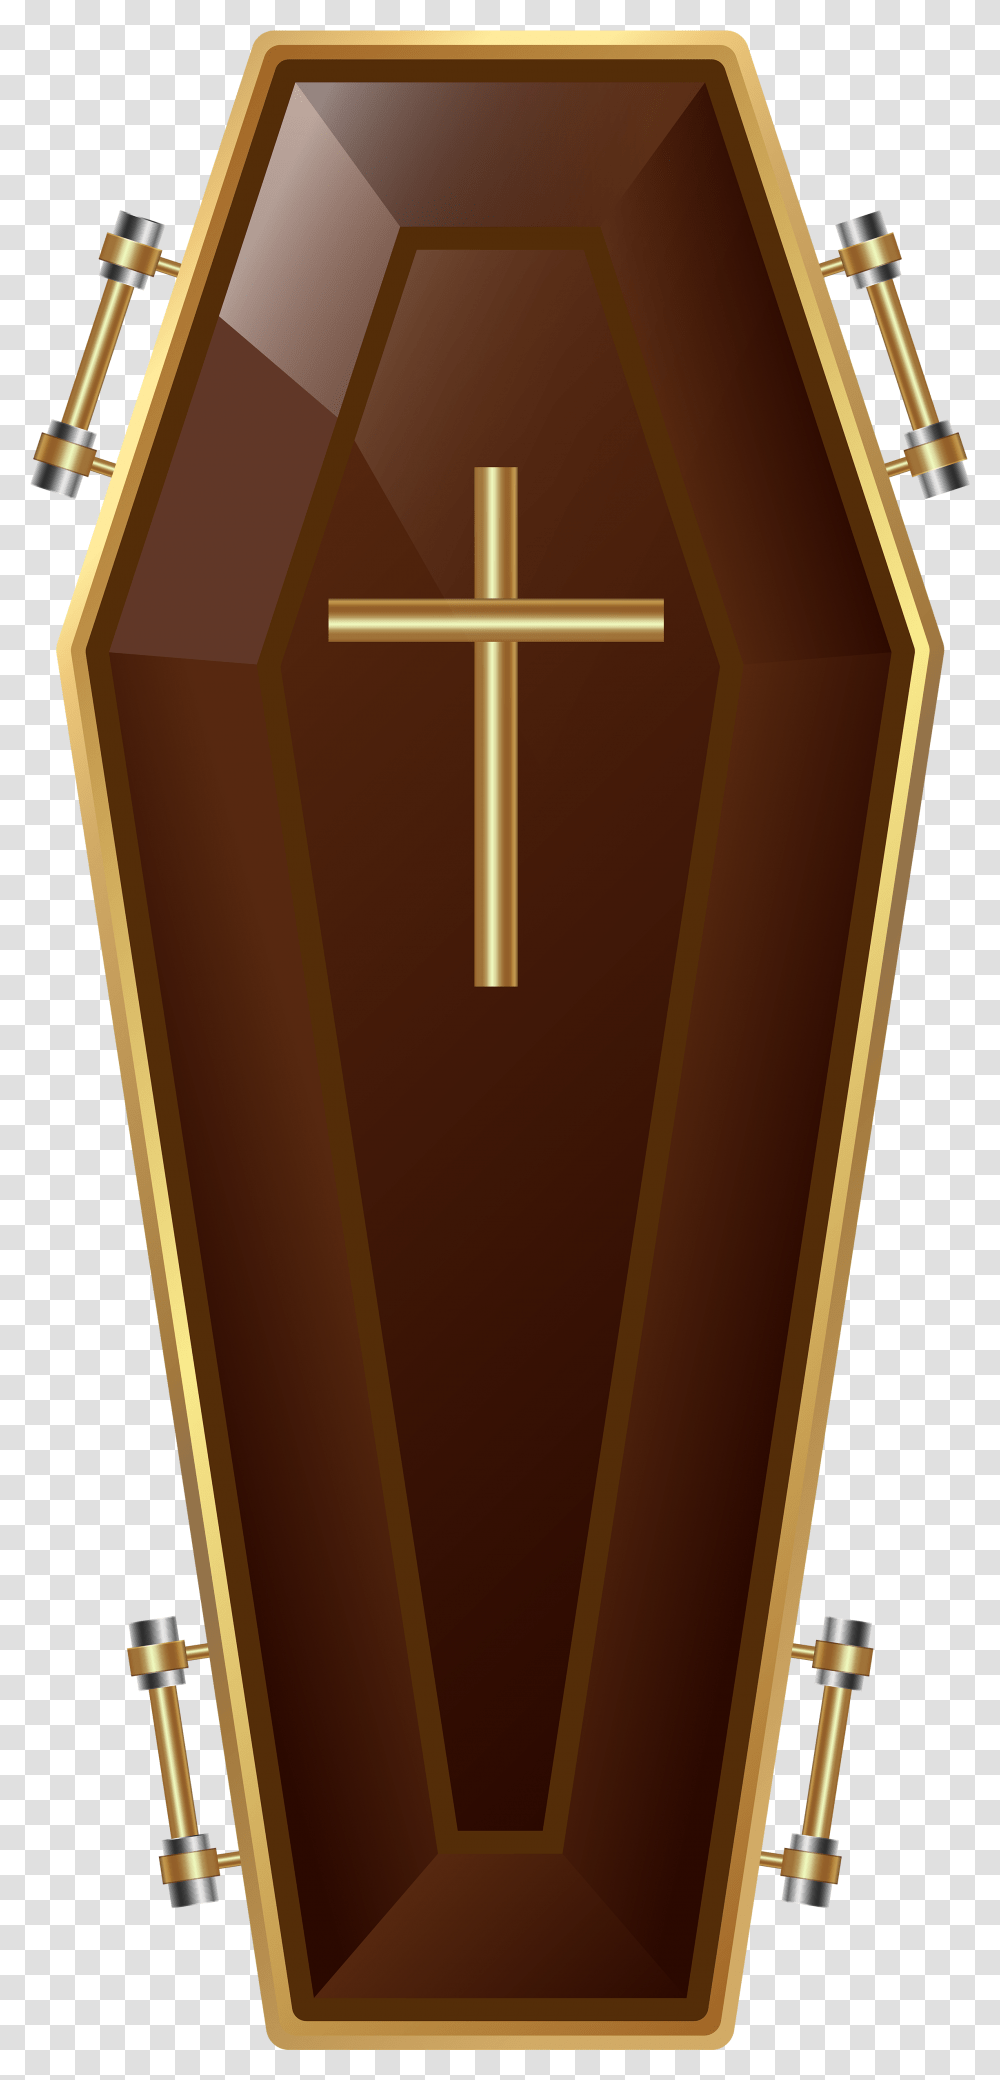 Coffin, Cross, Glass, Trophy Transparent Png